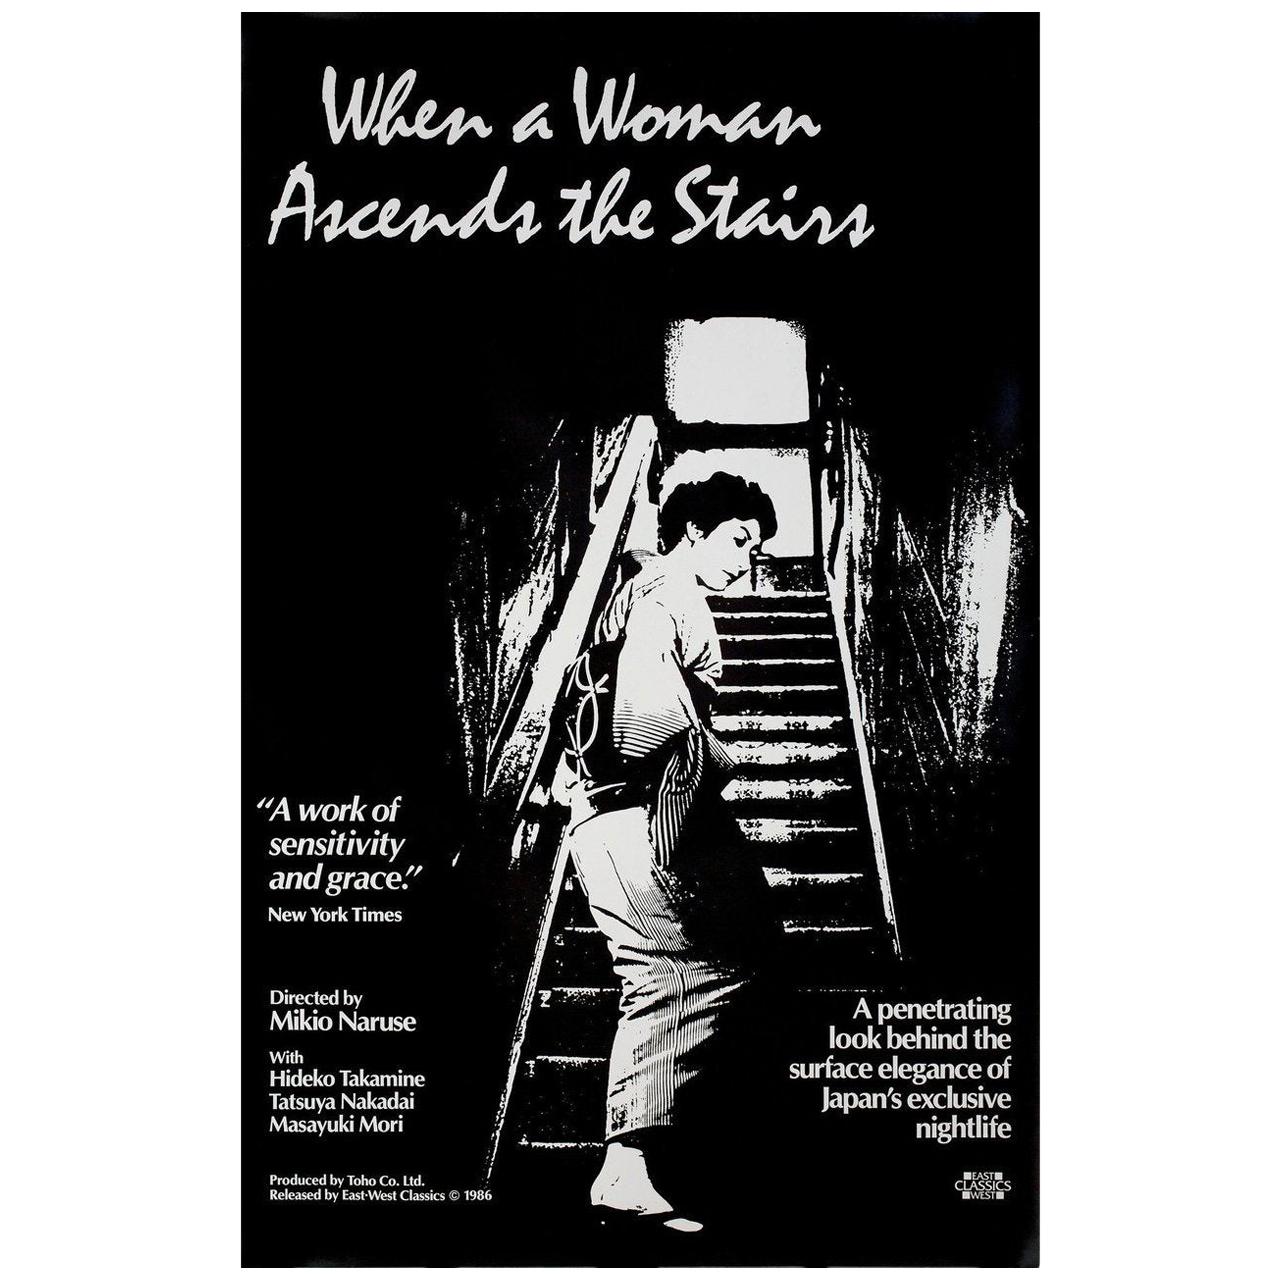 "When a Woman Ascends the Stairs" R1986 U.S. Film Poster For Sale